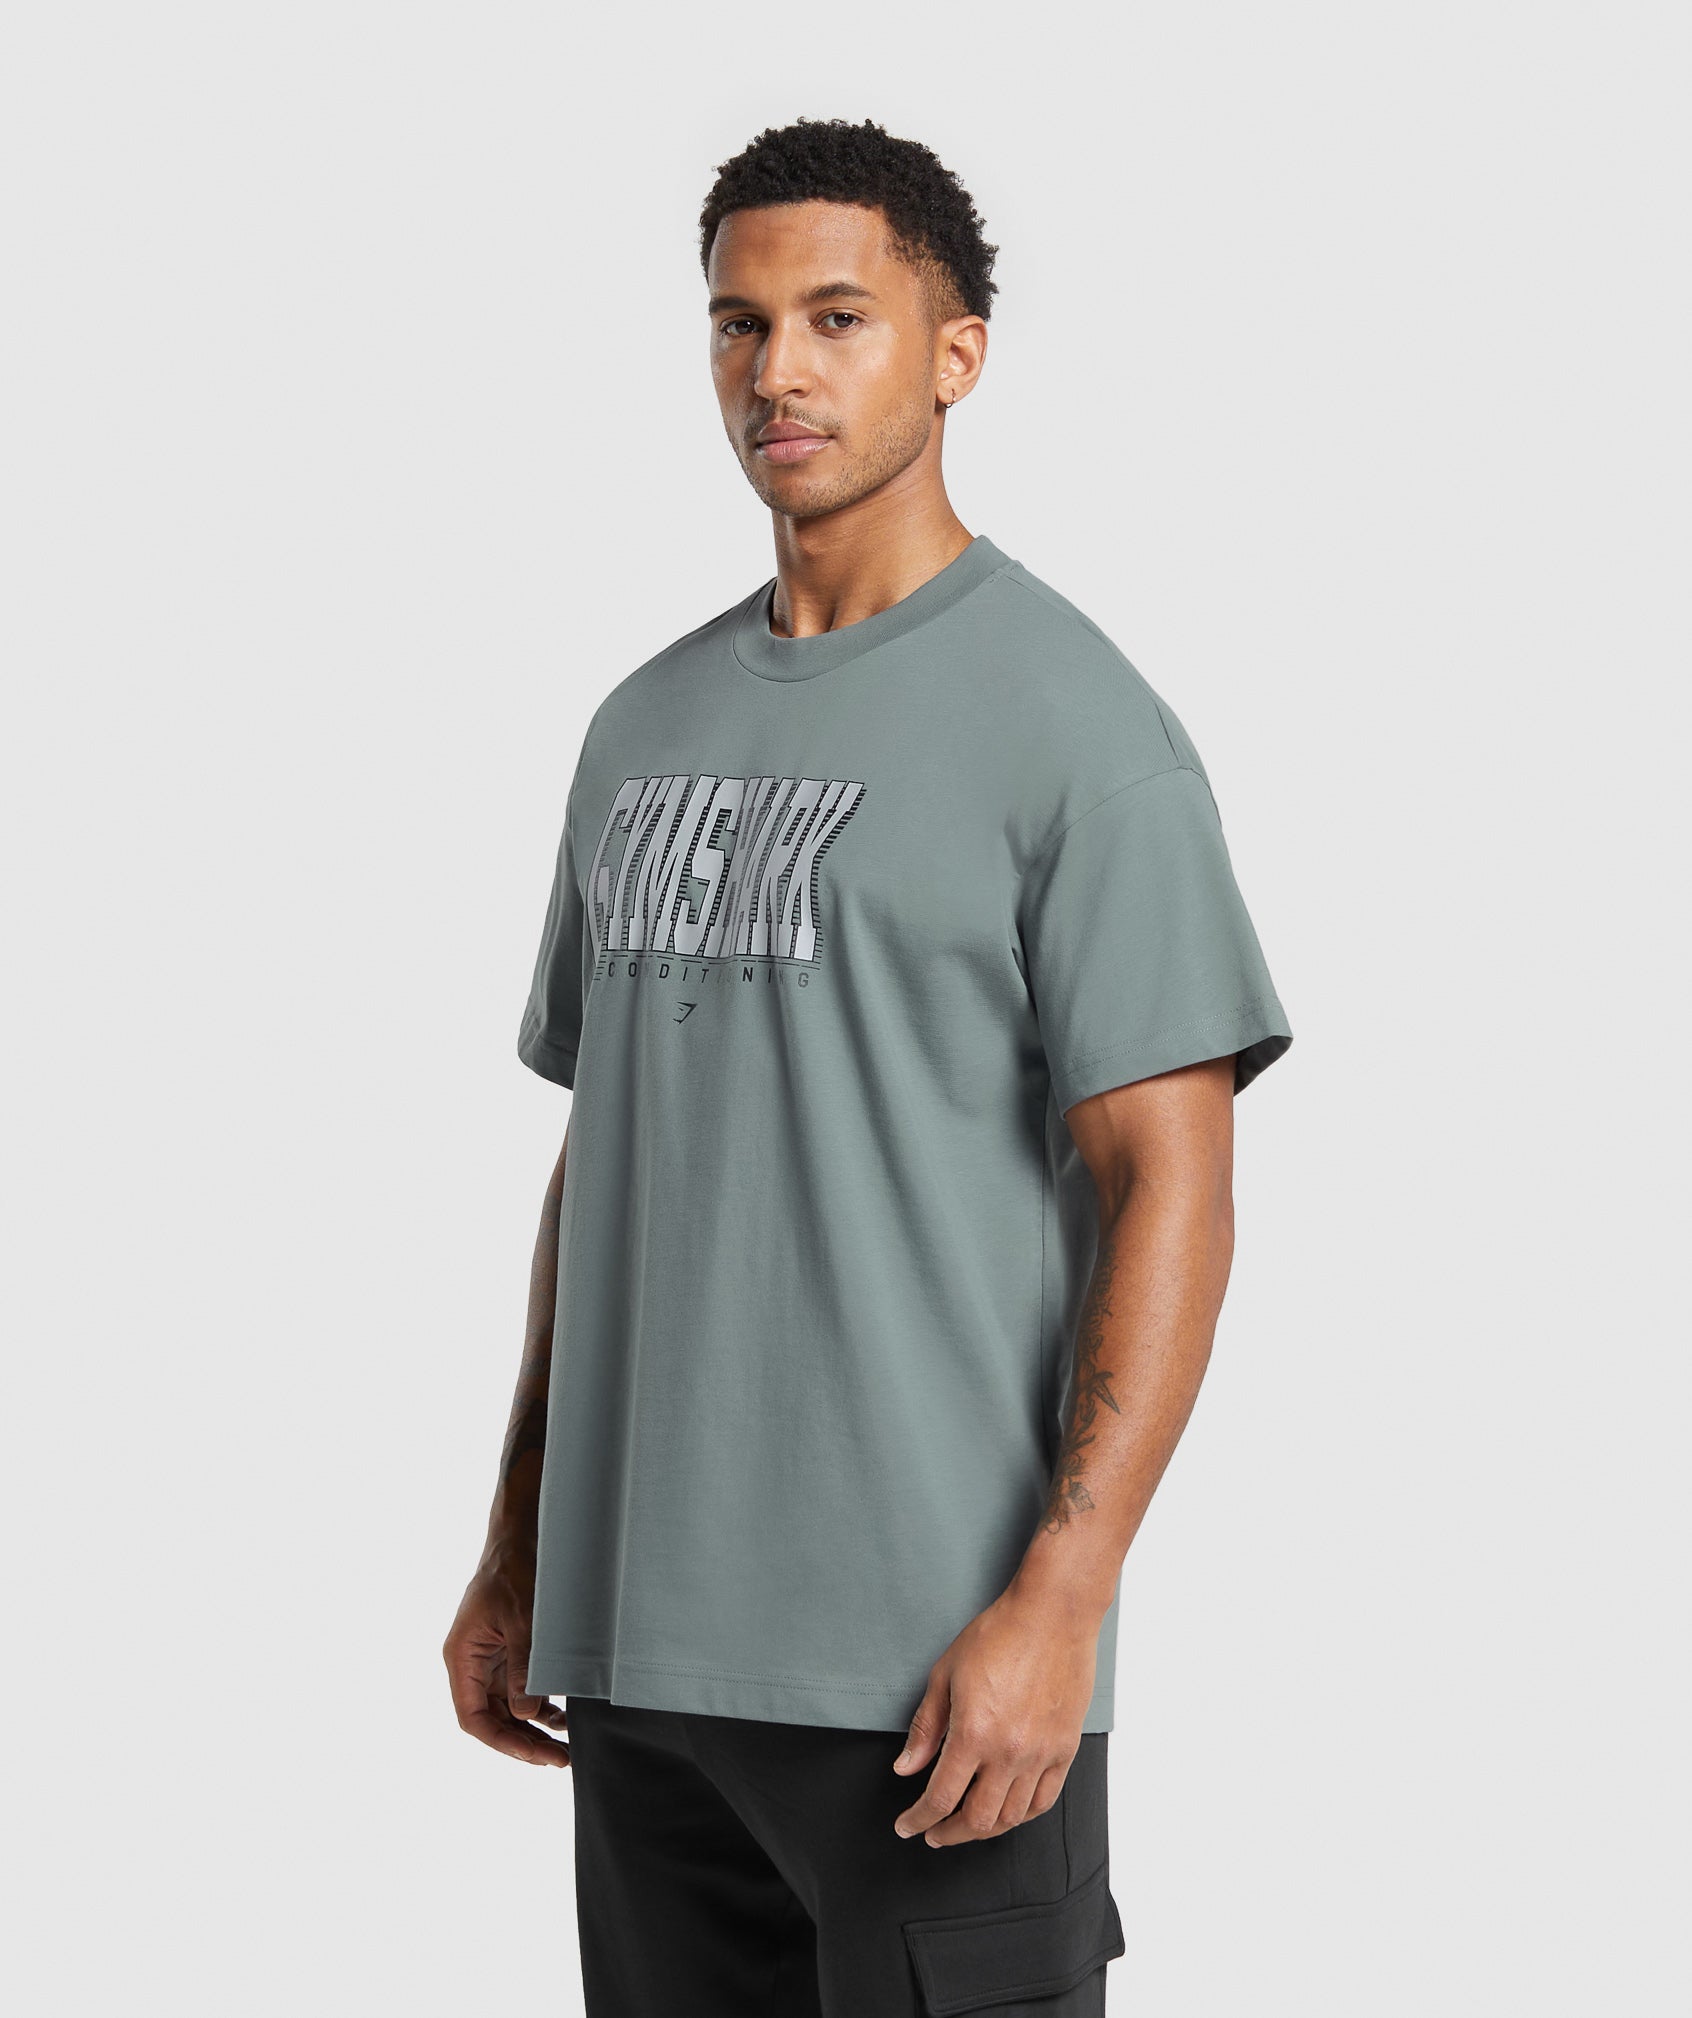 Conditioning Graphic T-Shirt in Cargo Teal - view 3